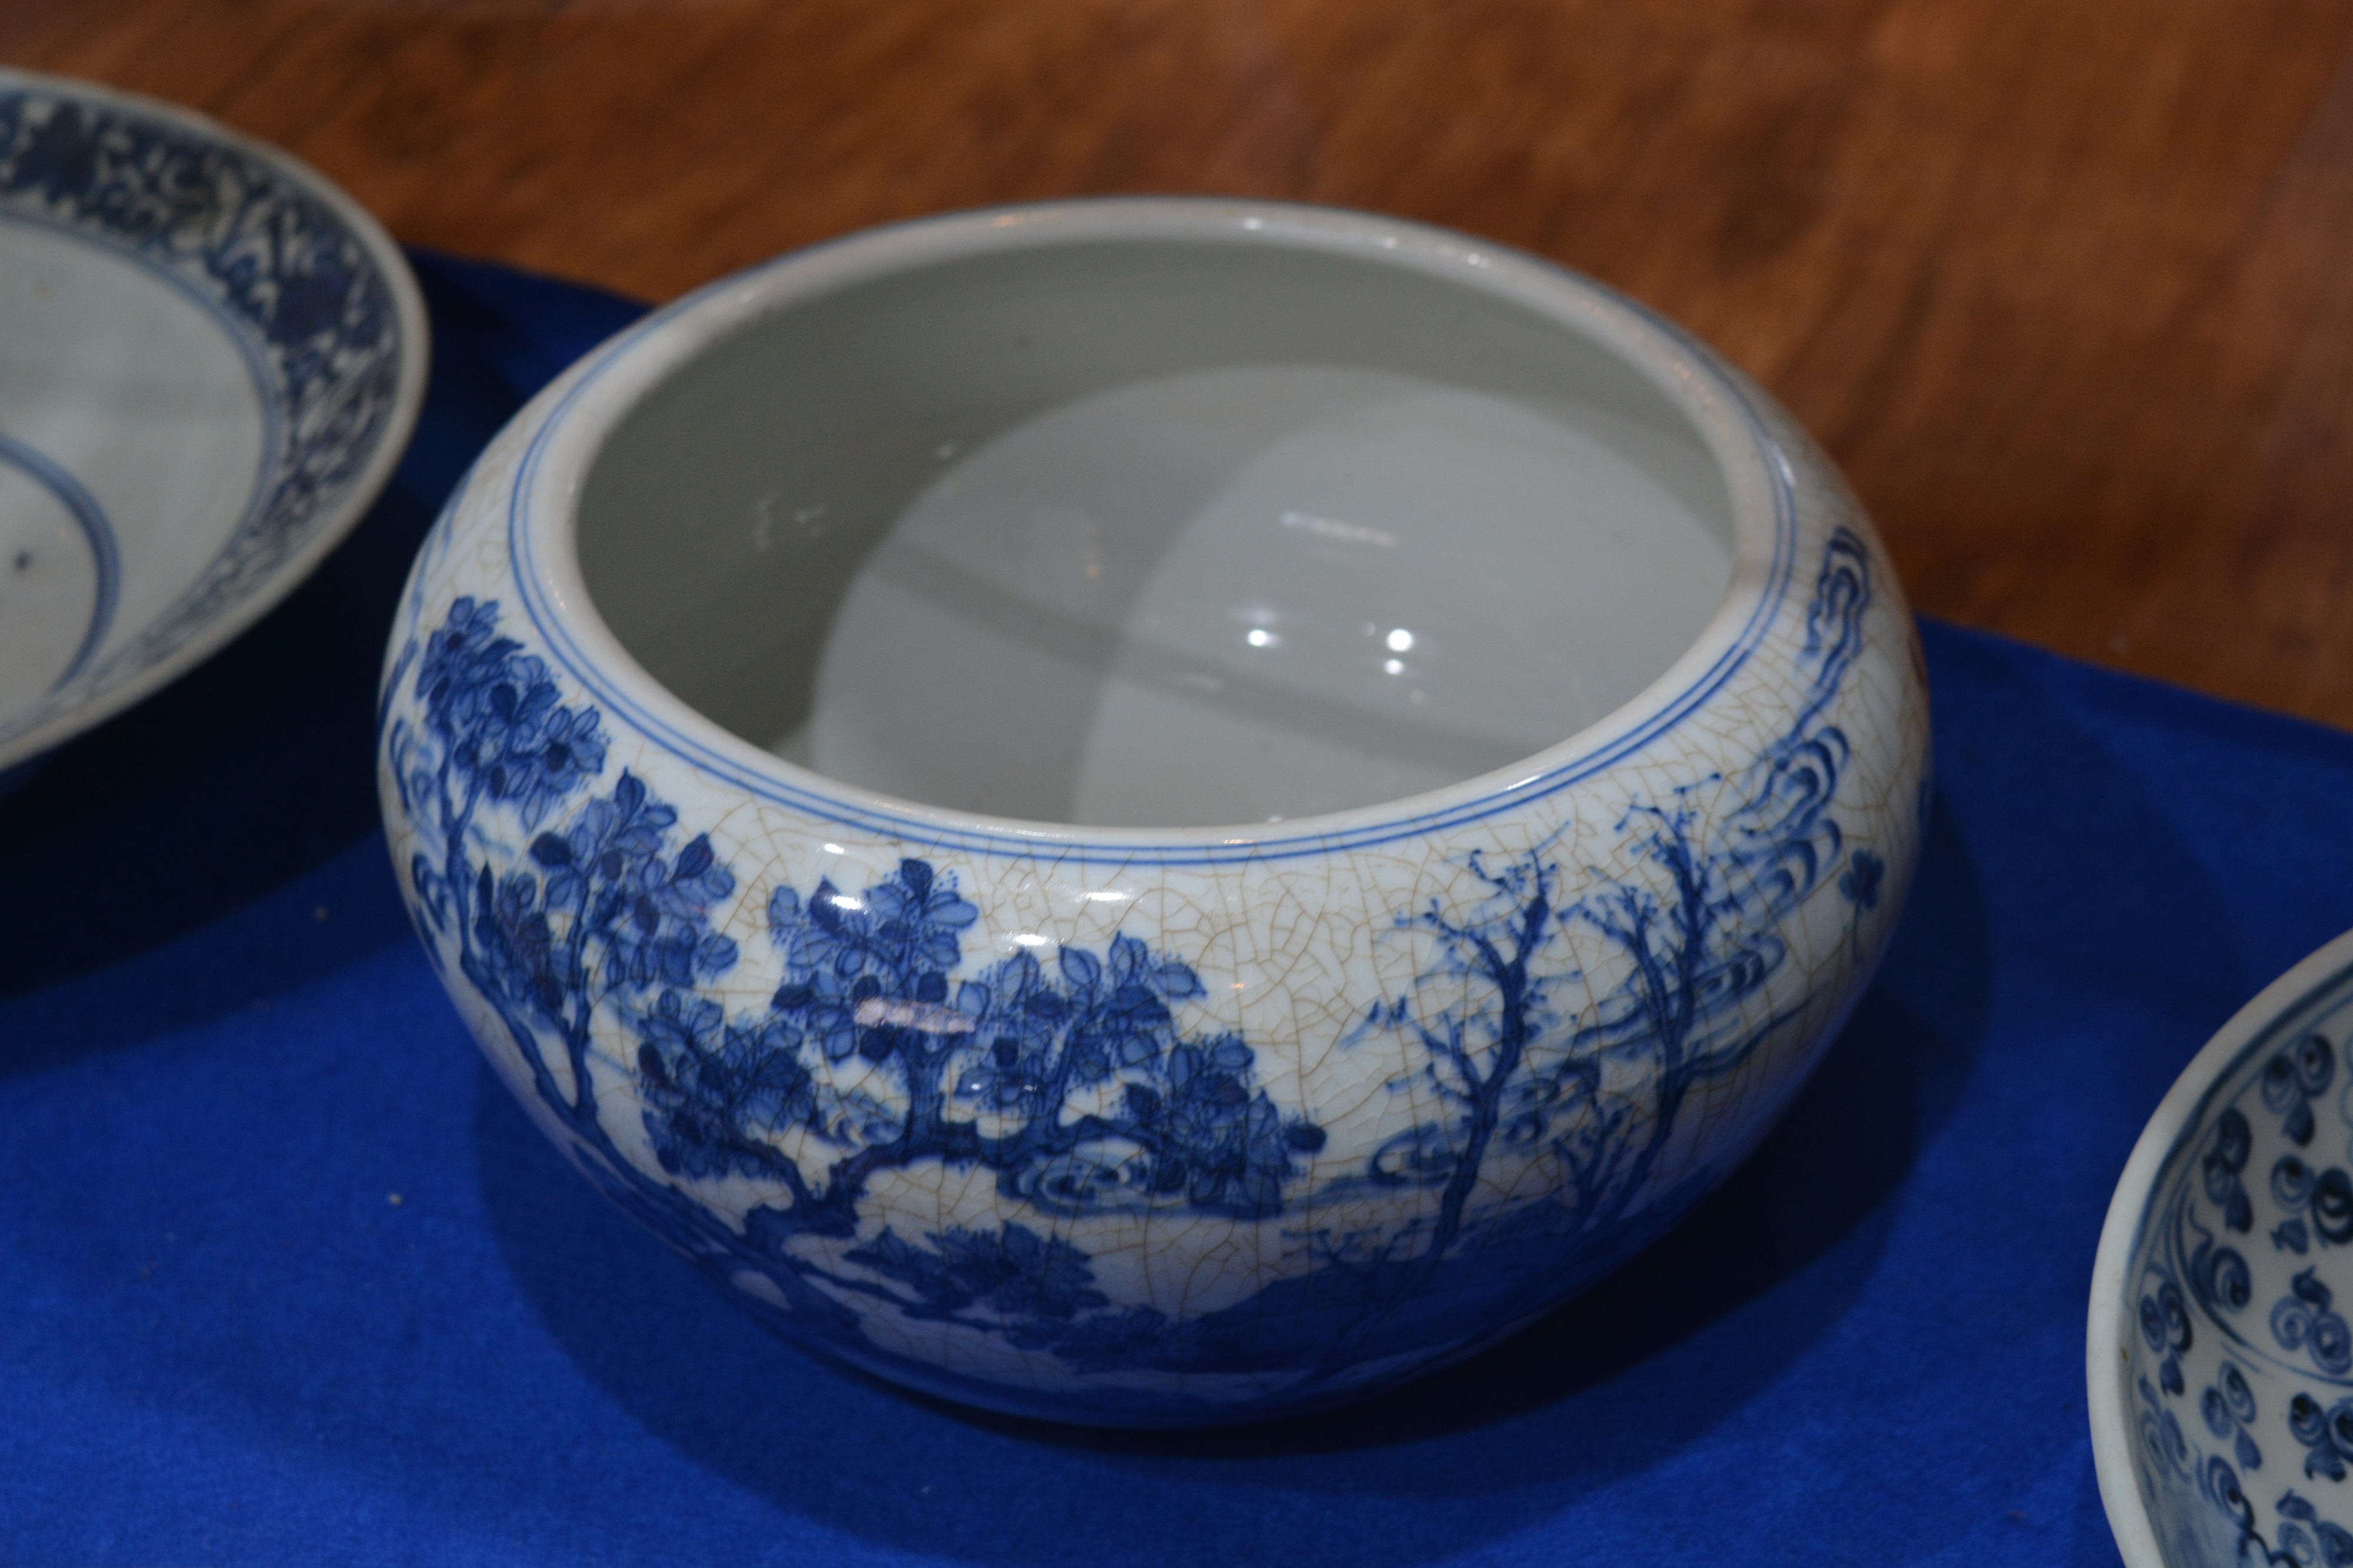 Cracked ice porcelain bowl Chinese, 19th Century painted with scholars around the side, 26cm - Image 9 of 12